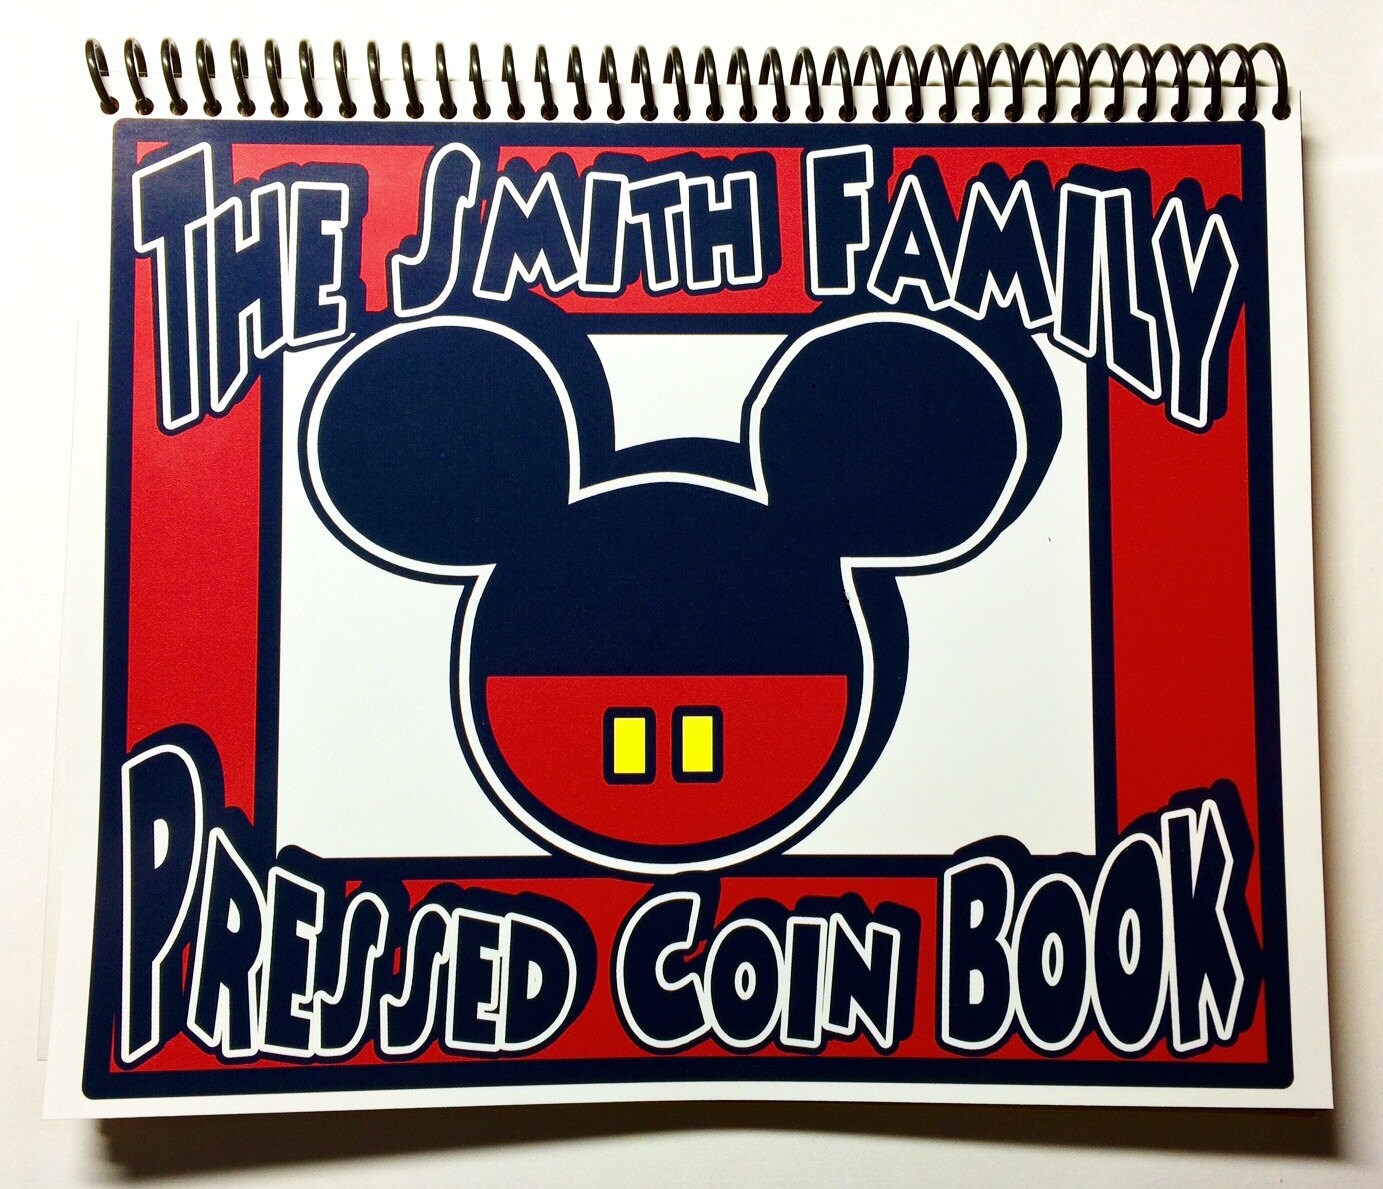 Large Personalized Disney Pressed Penny Pressed Coin Book with